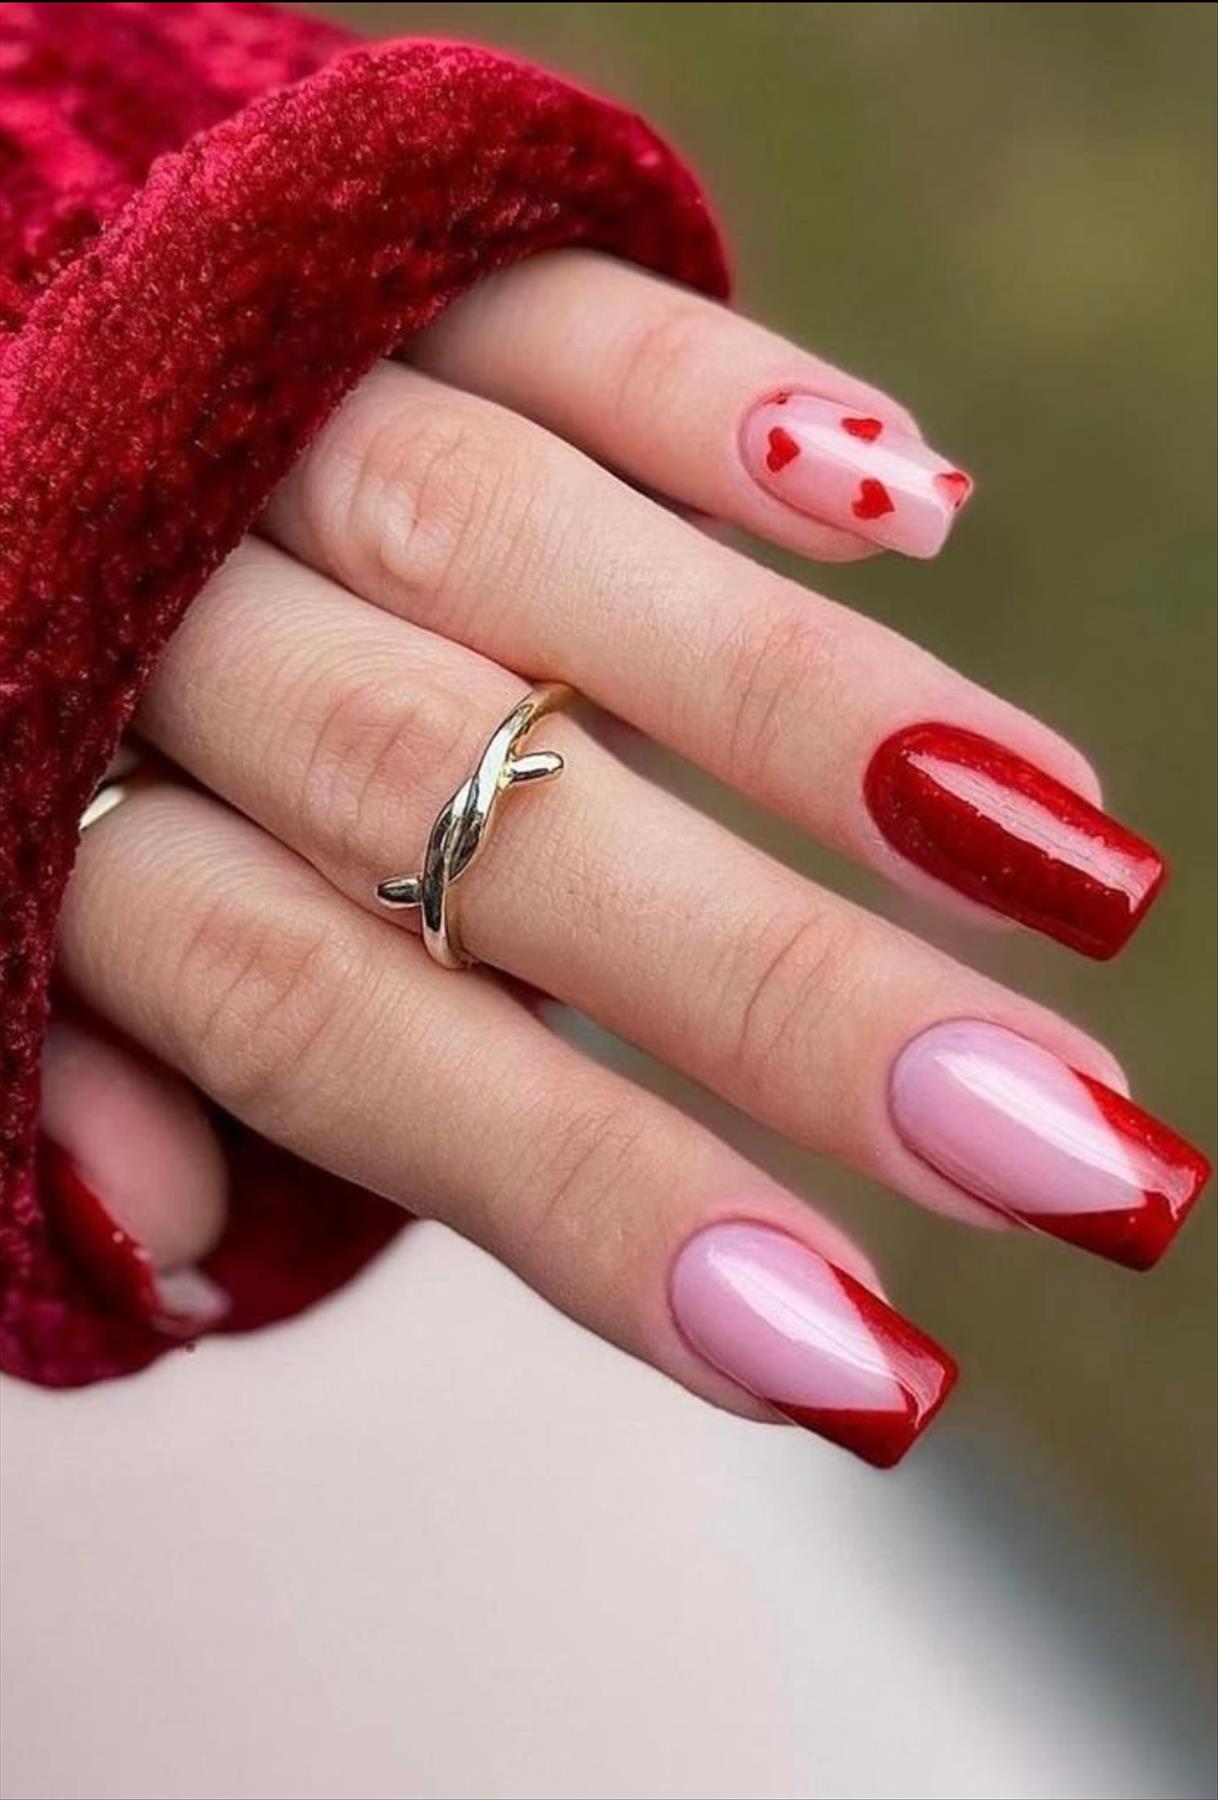 Cute Valentine's Day Acrylic Nails Art For 14th, Feb Nails